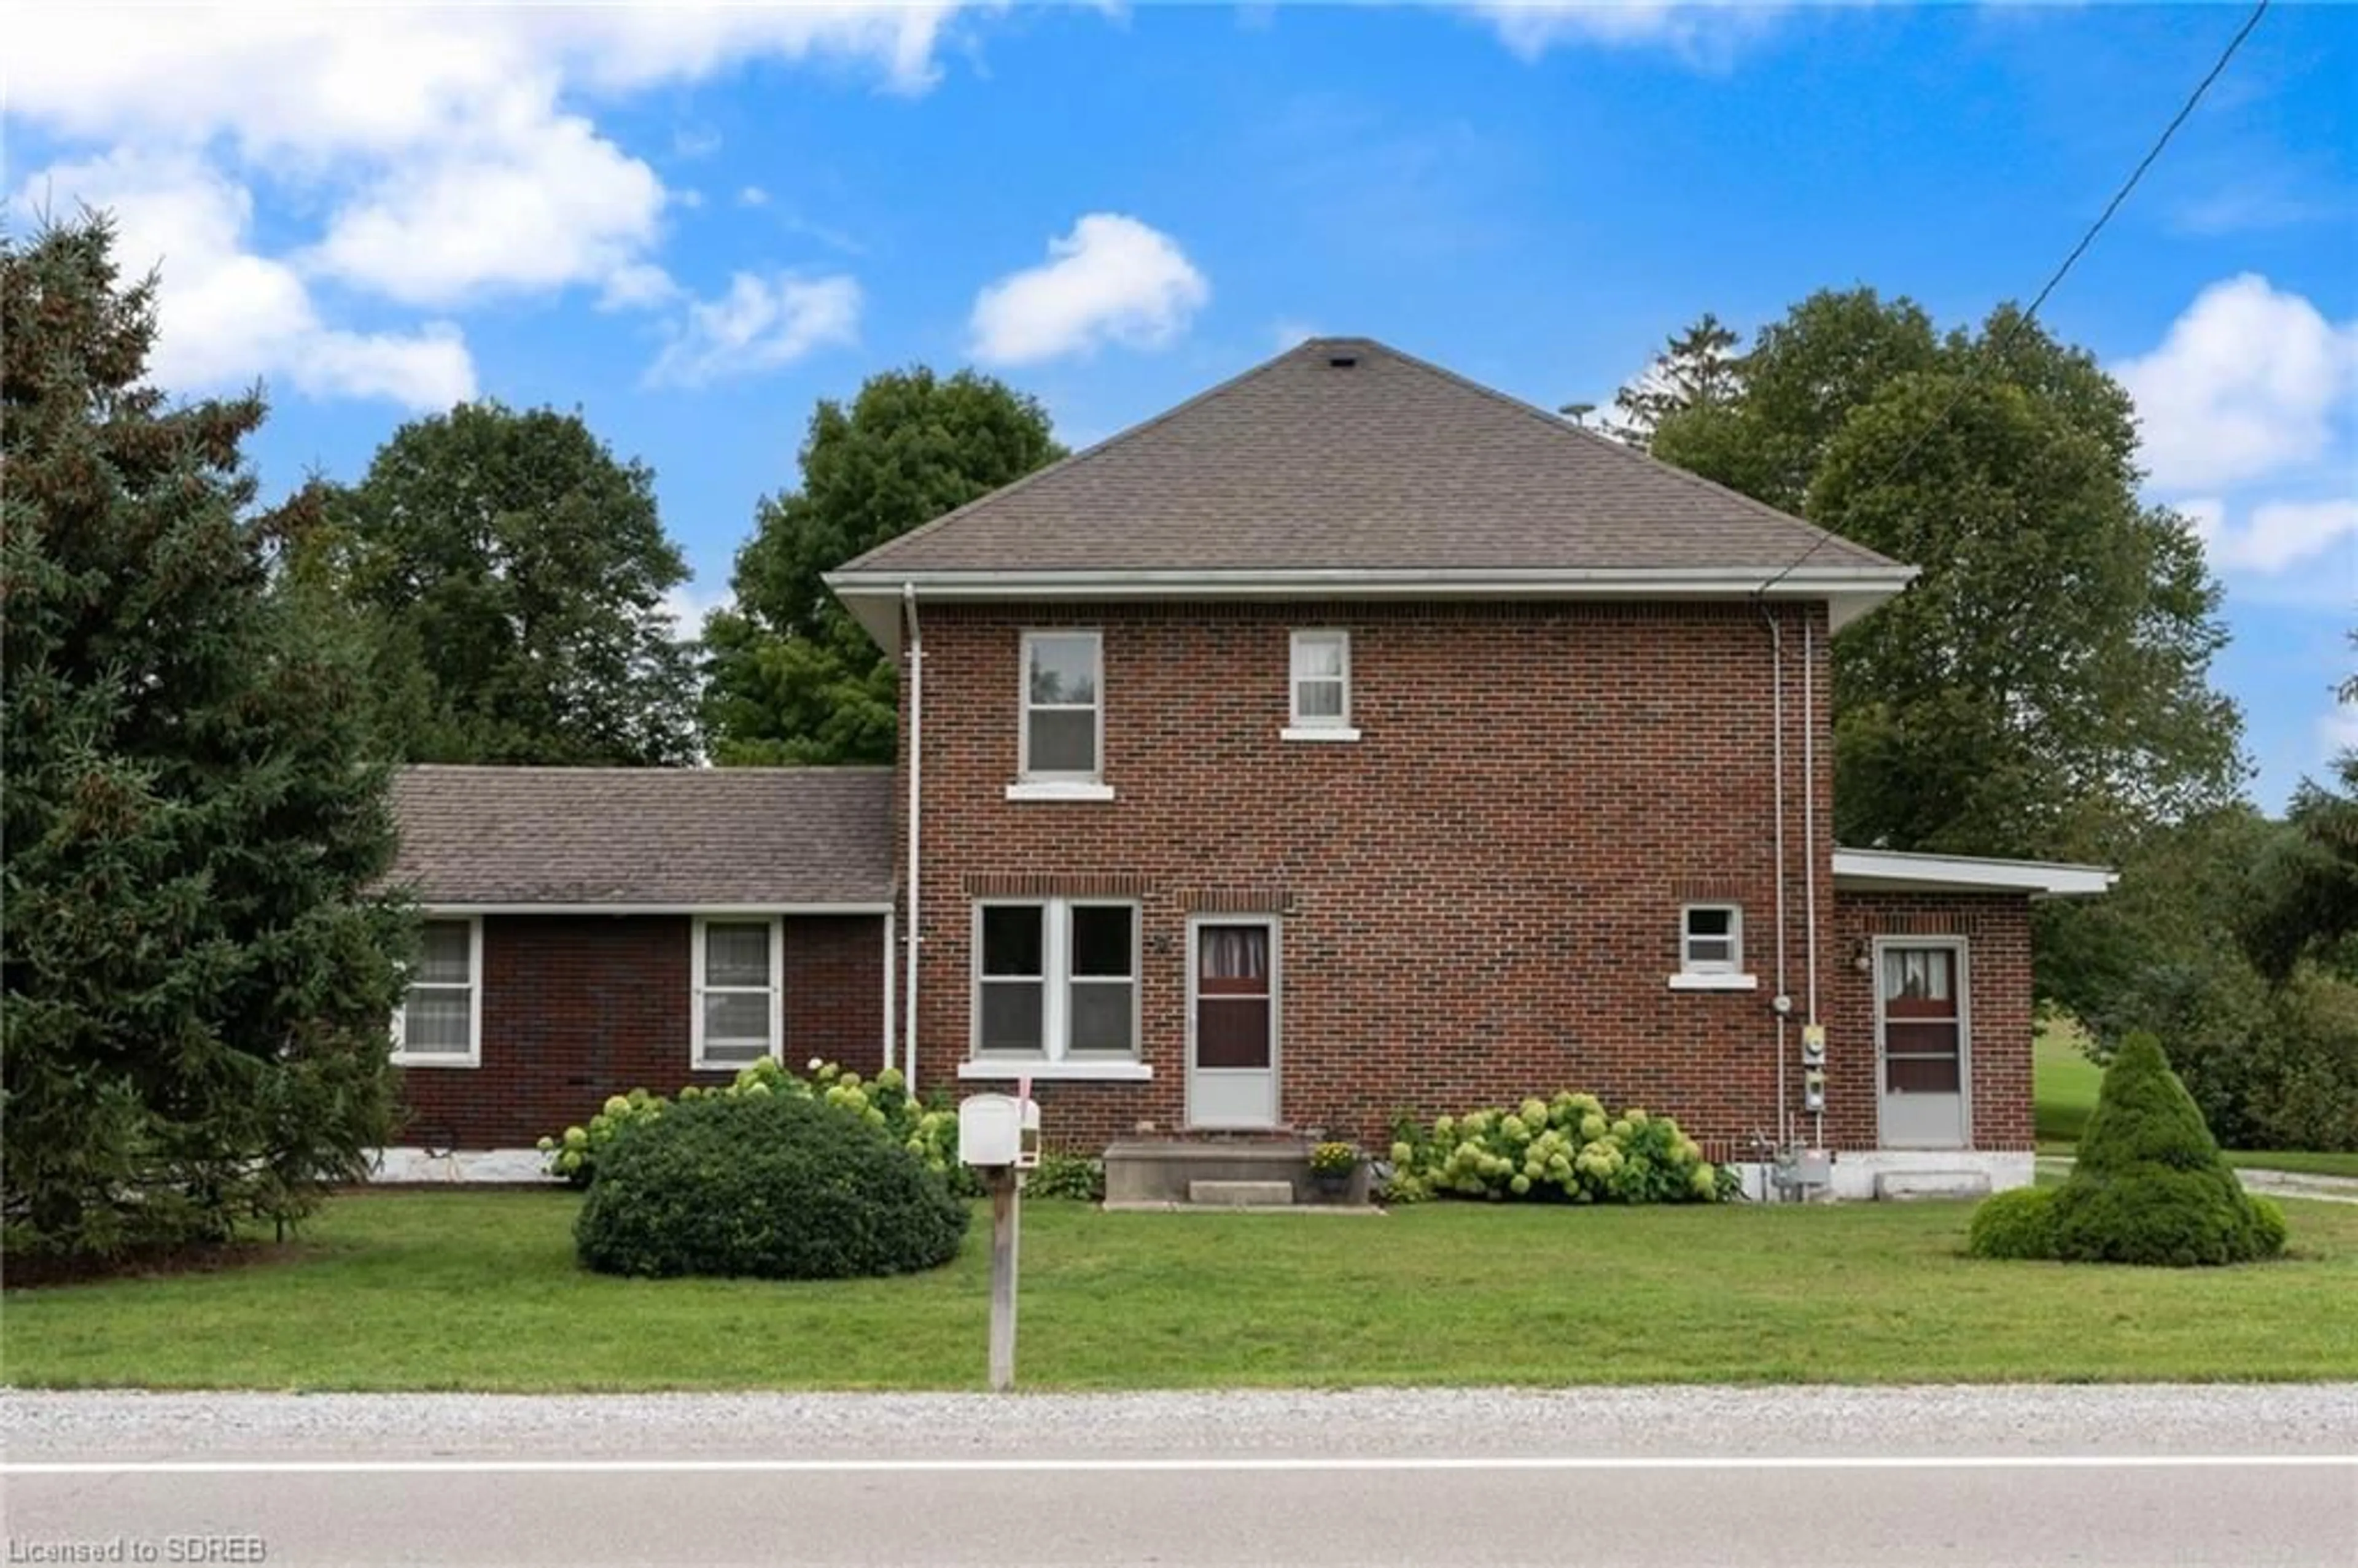 Home with brick exterior material for 907 Forestry Farm Rd, St. Williams Ontario N0E 1P0